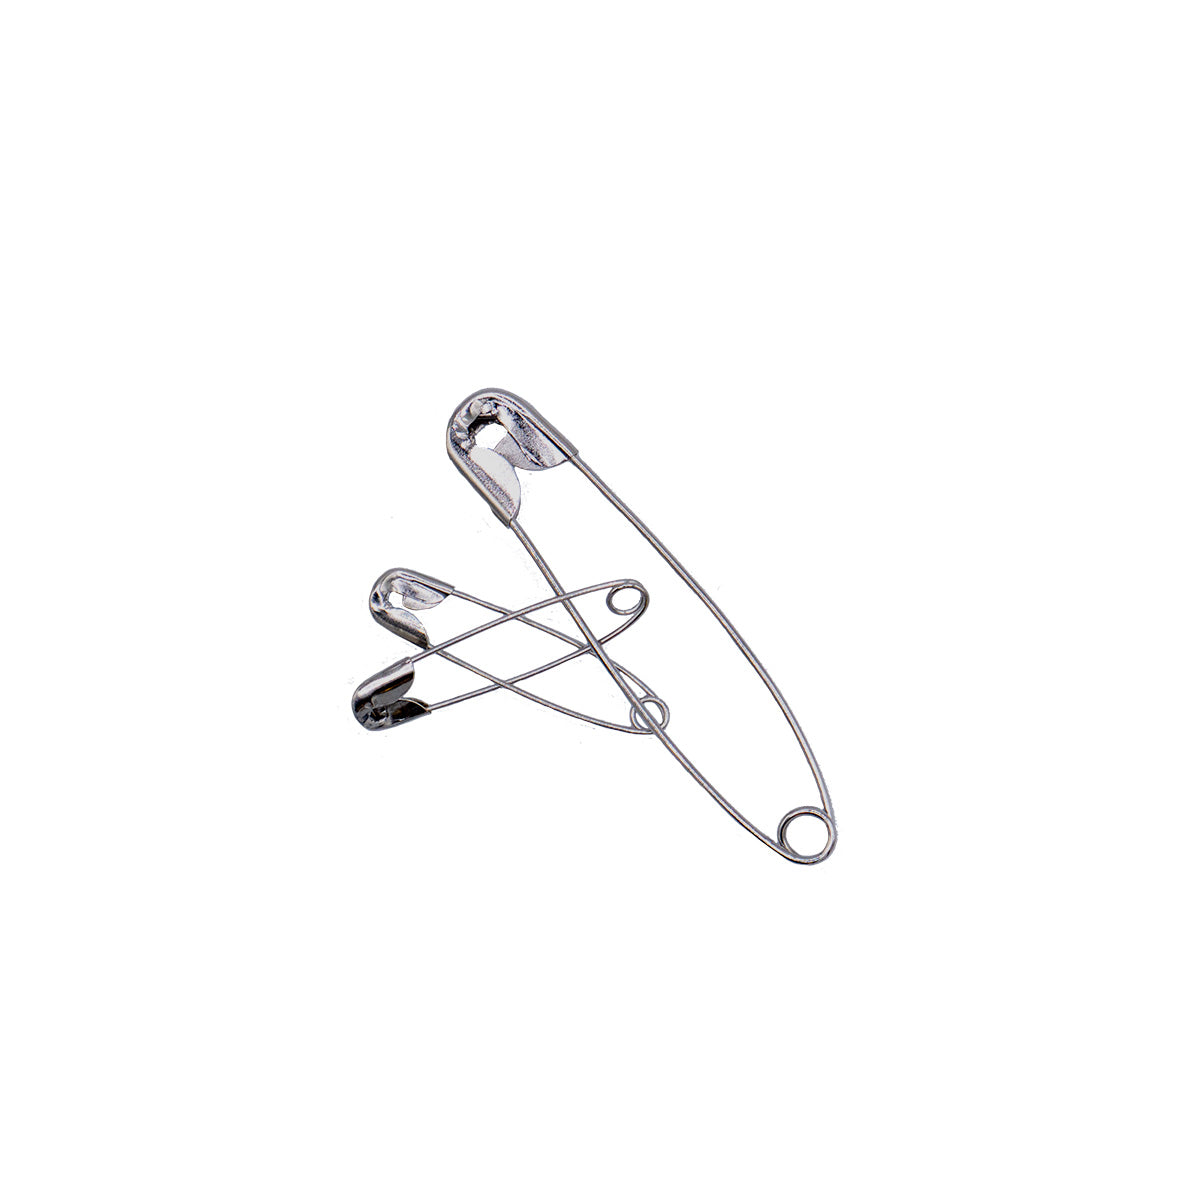 One large safety pin with two smaller safety pins.